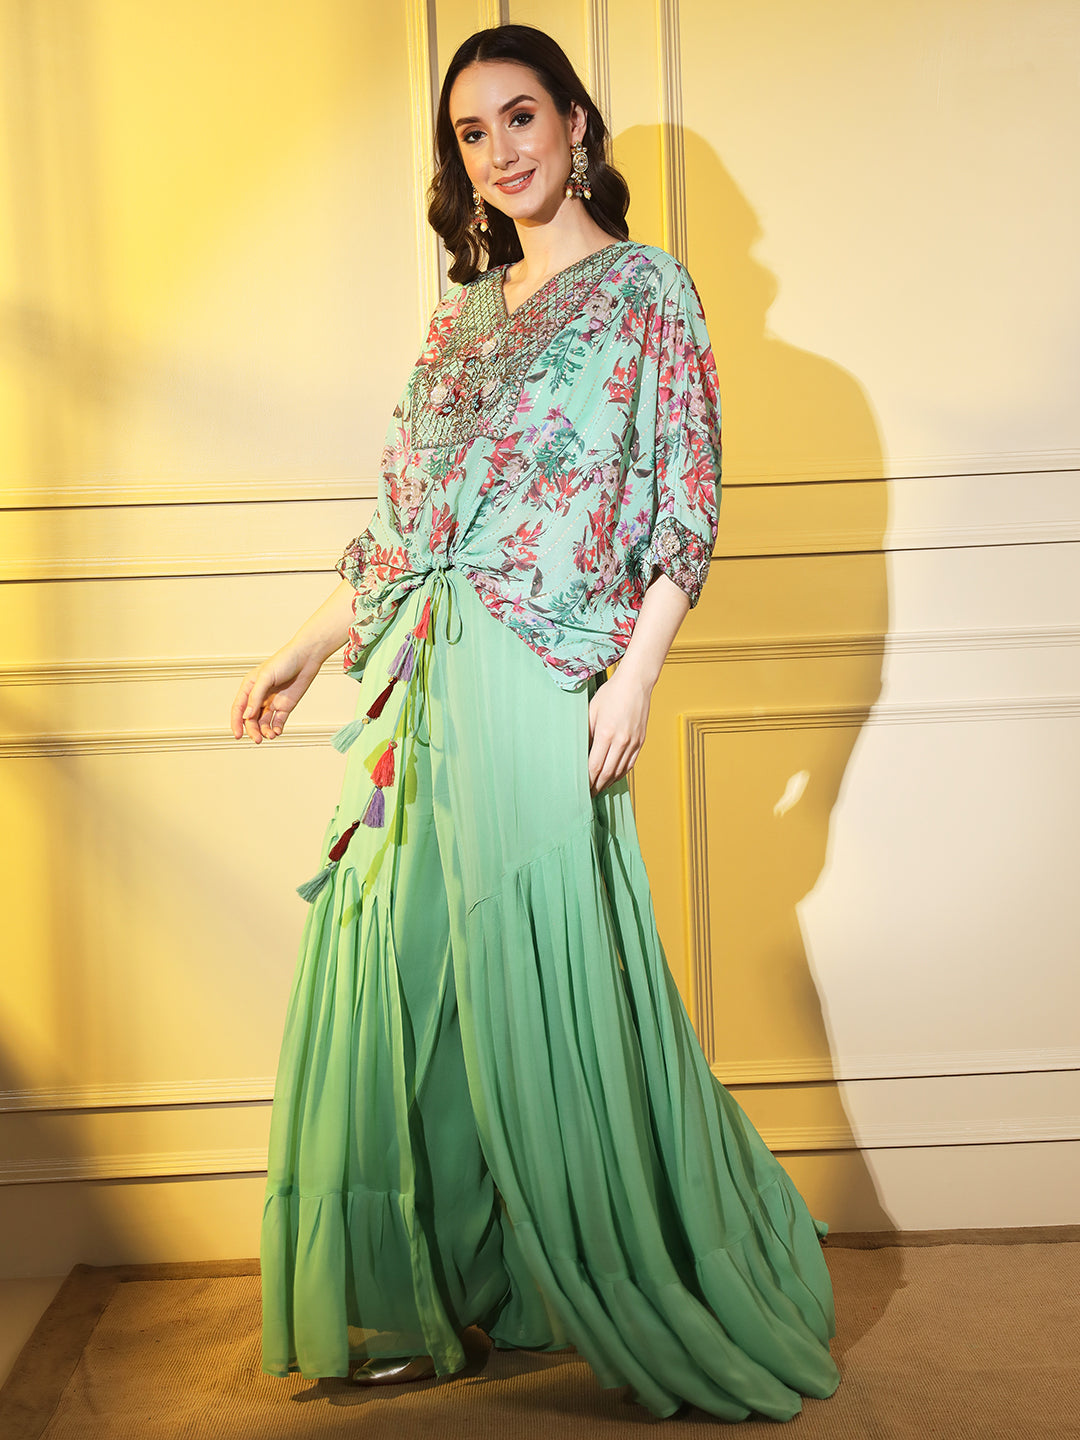 Bloom with Elegance: Green Floral Designer Indowestern Co-ord Set with Handwork Embroidery | Hues of India